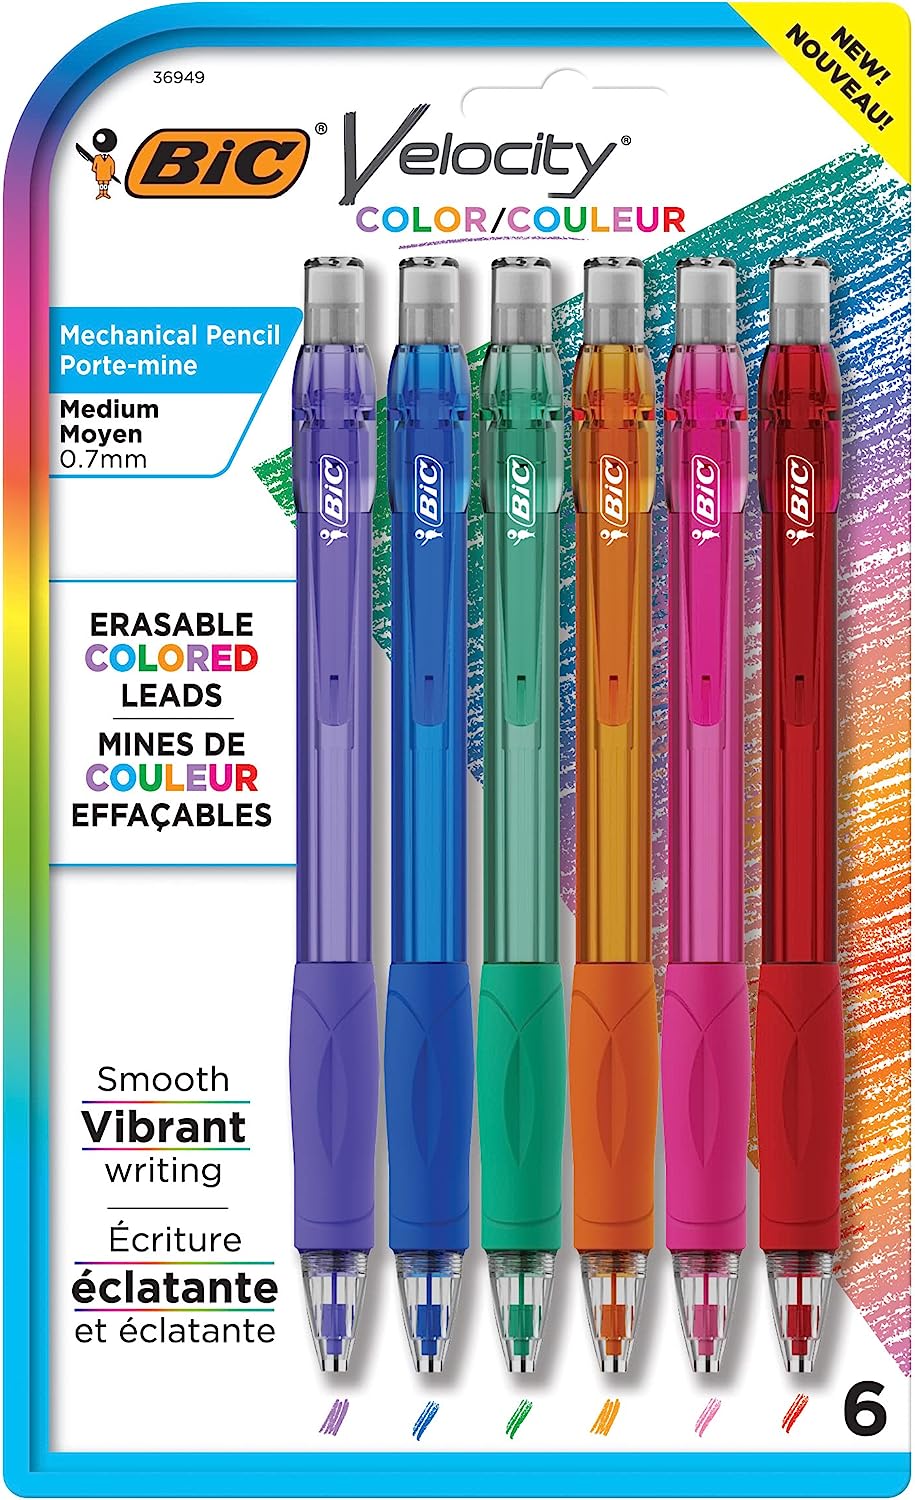 BIC Velocity Mechanical Pencils with Colored Leads, [...]